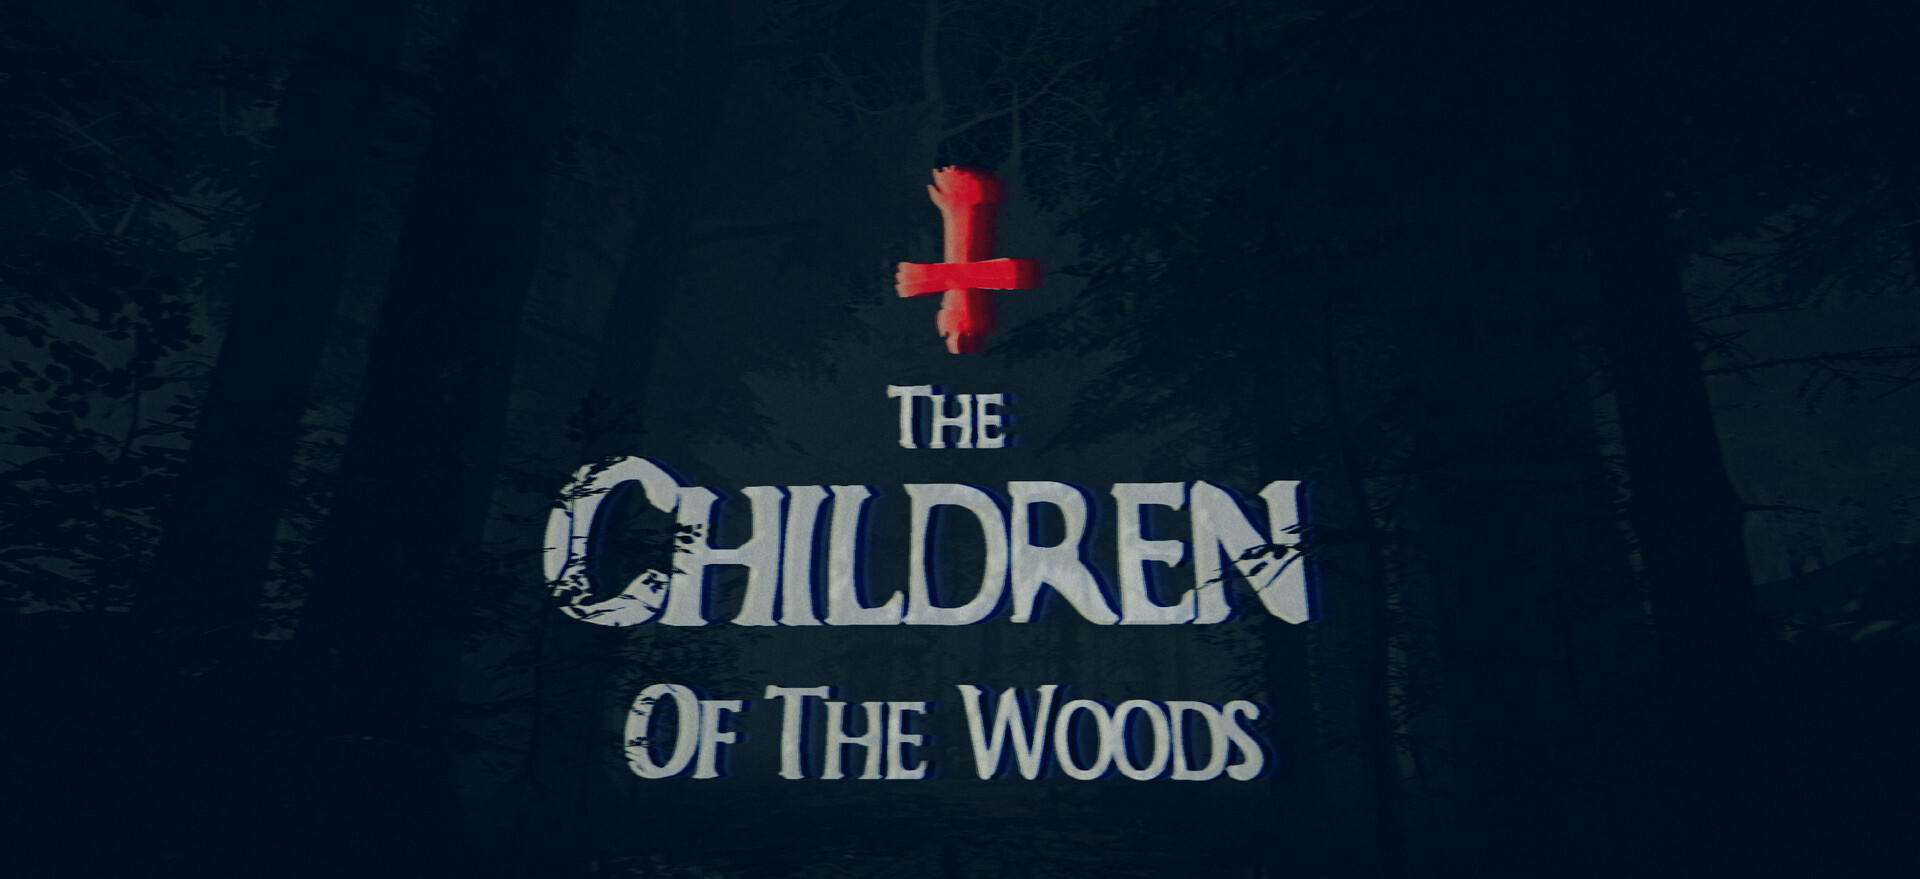 Screenshot 1 of The Children of The Woods - ខ្សែអាត់បាត់បង់ 